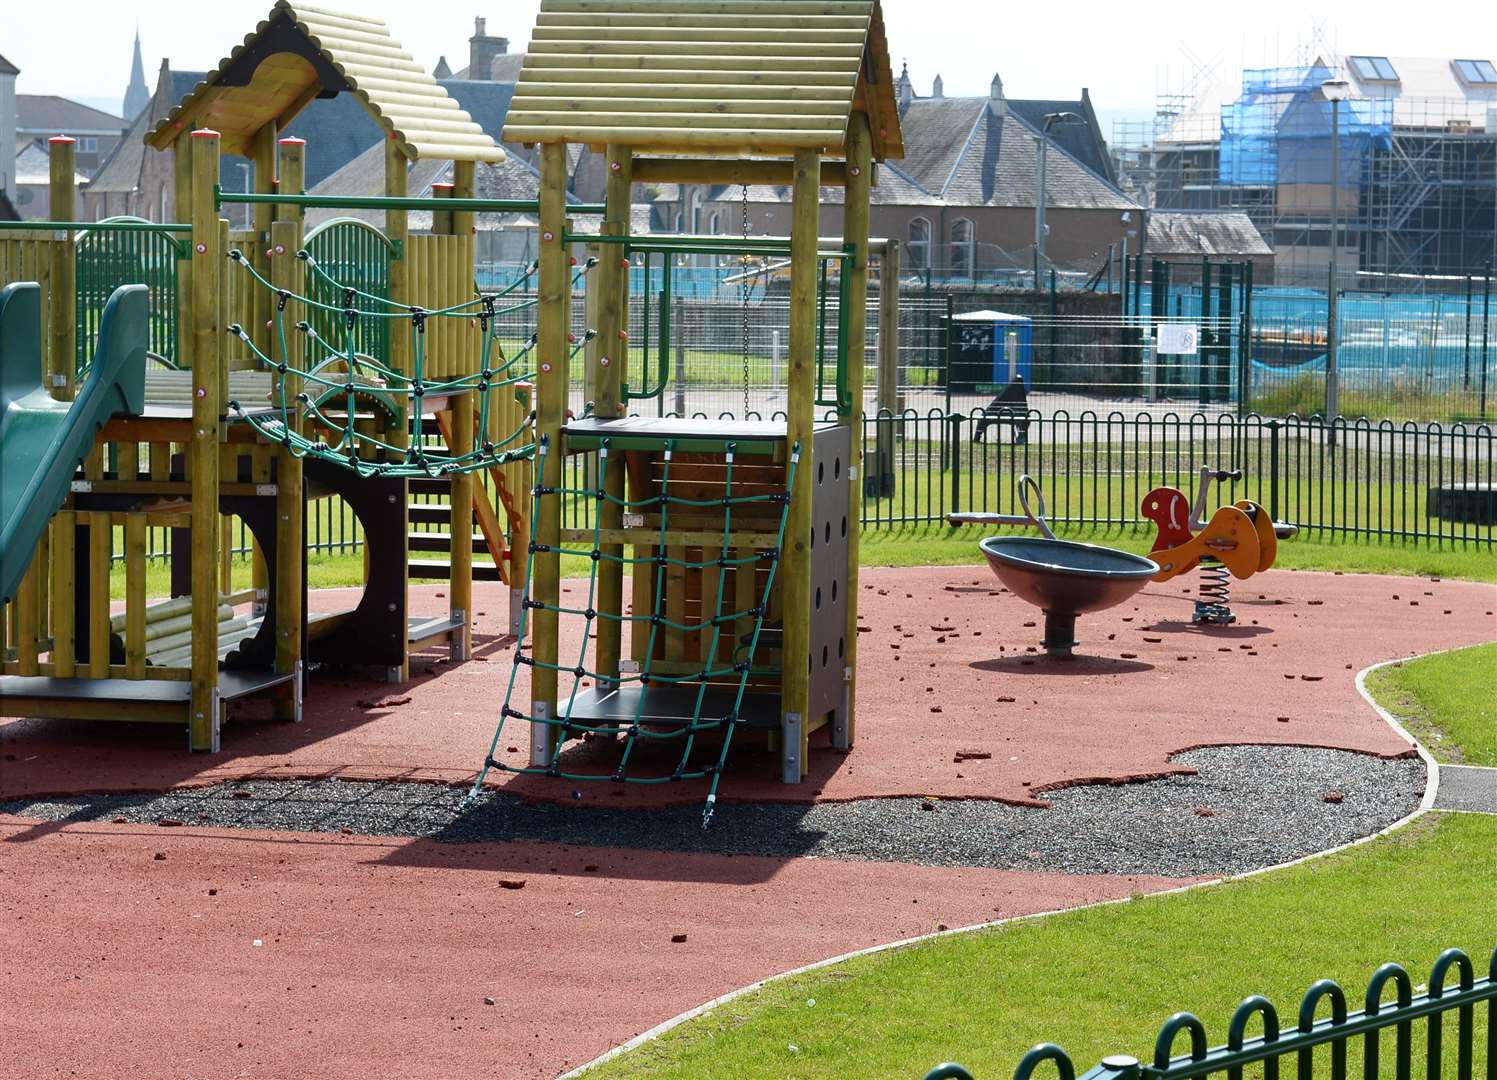 Play parks are being closed due to coronavirus.